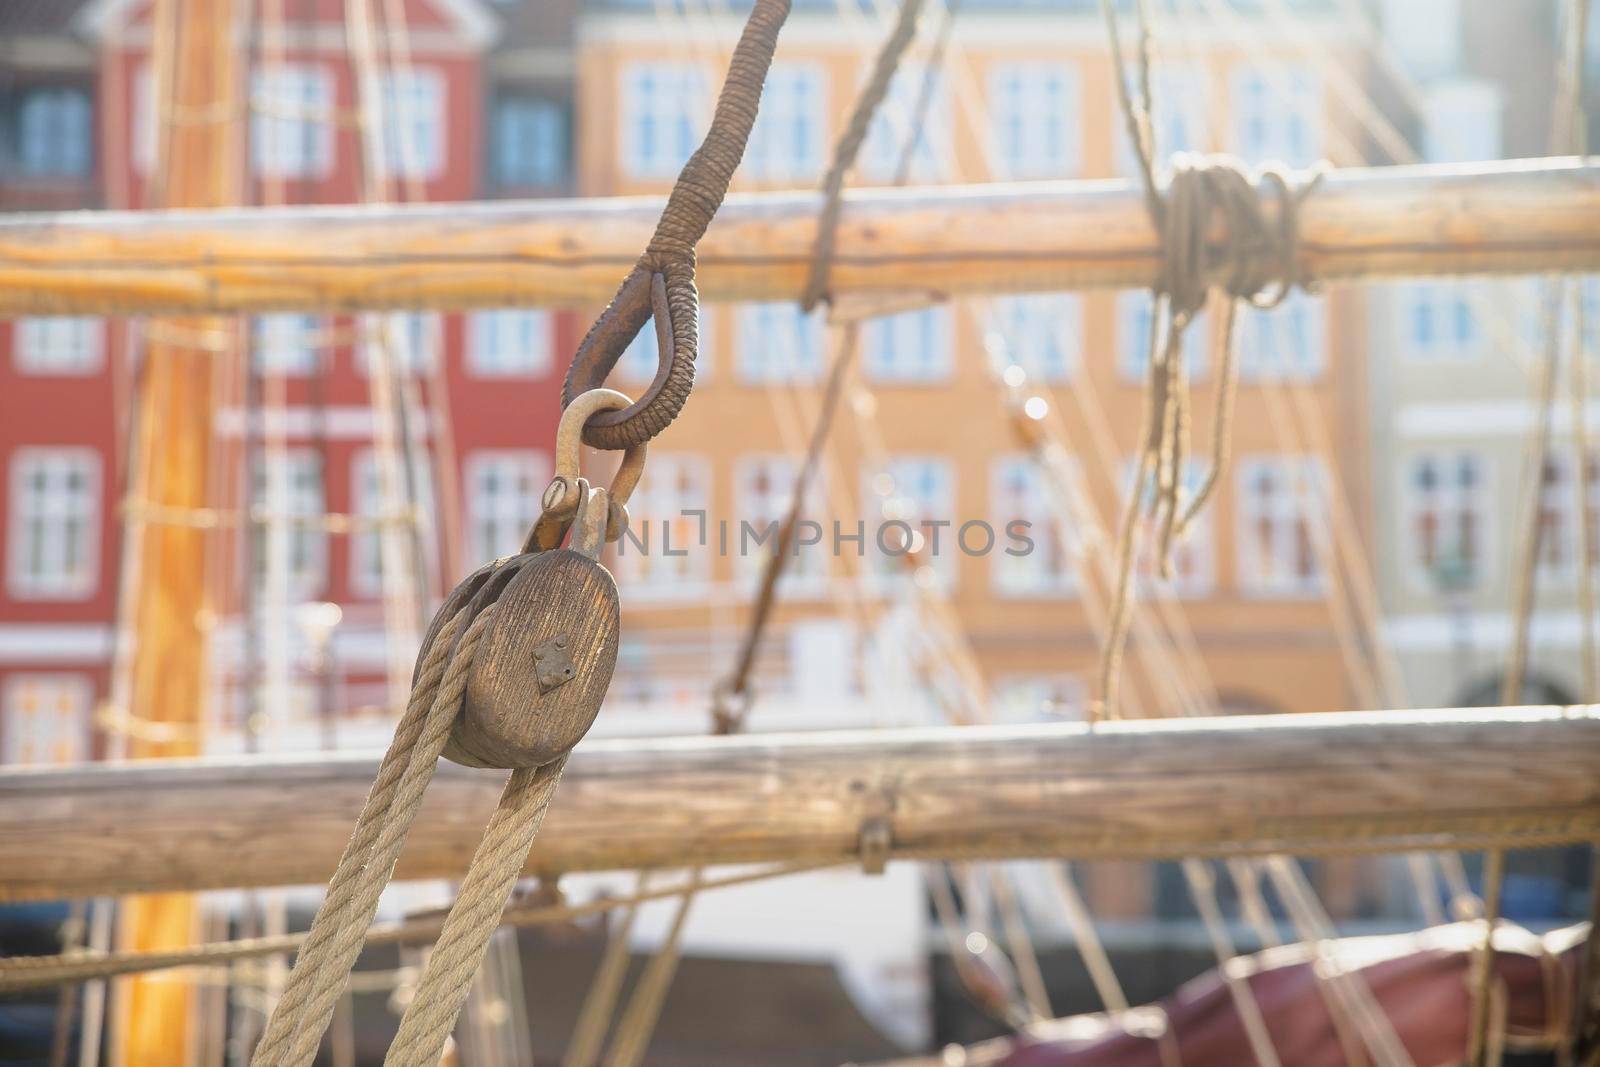 Rigging on an old sailing ship in Denmark by Viktor_Osypenko